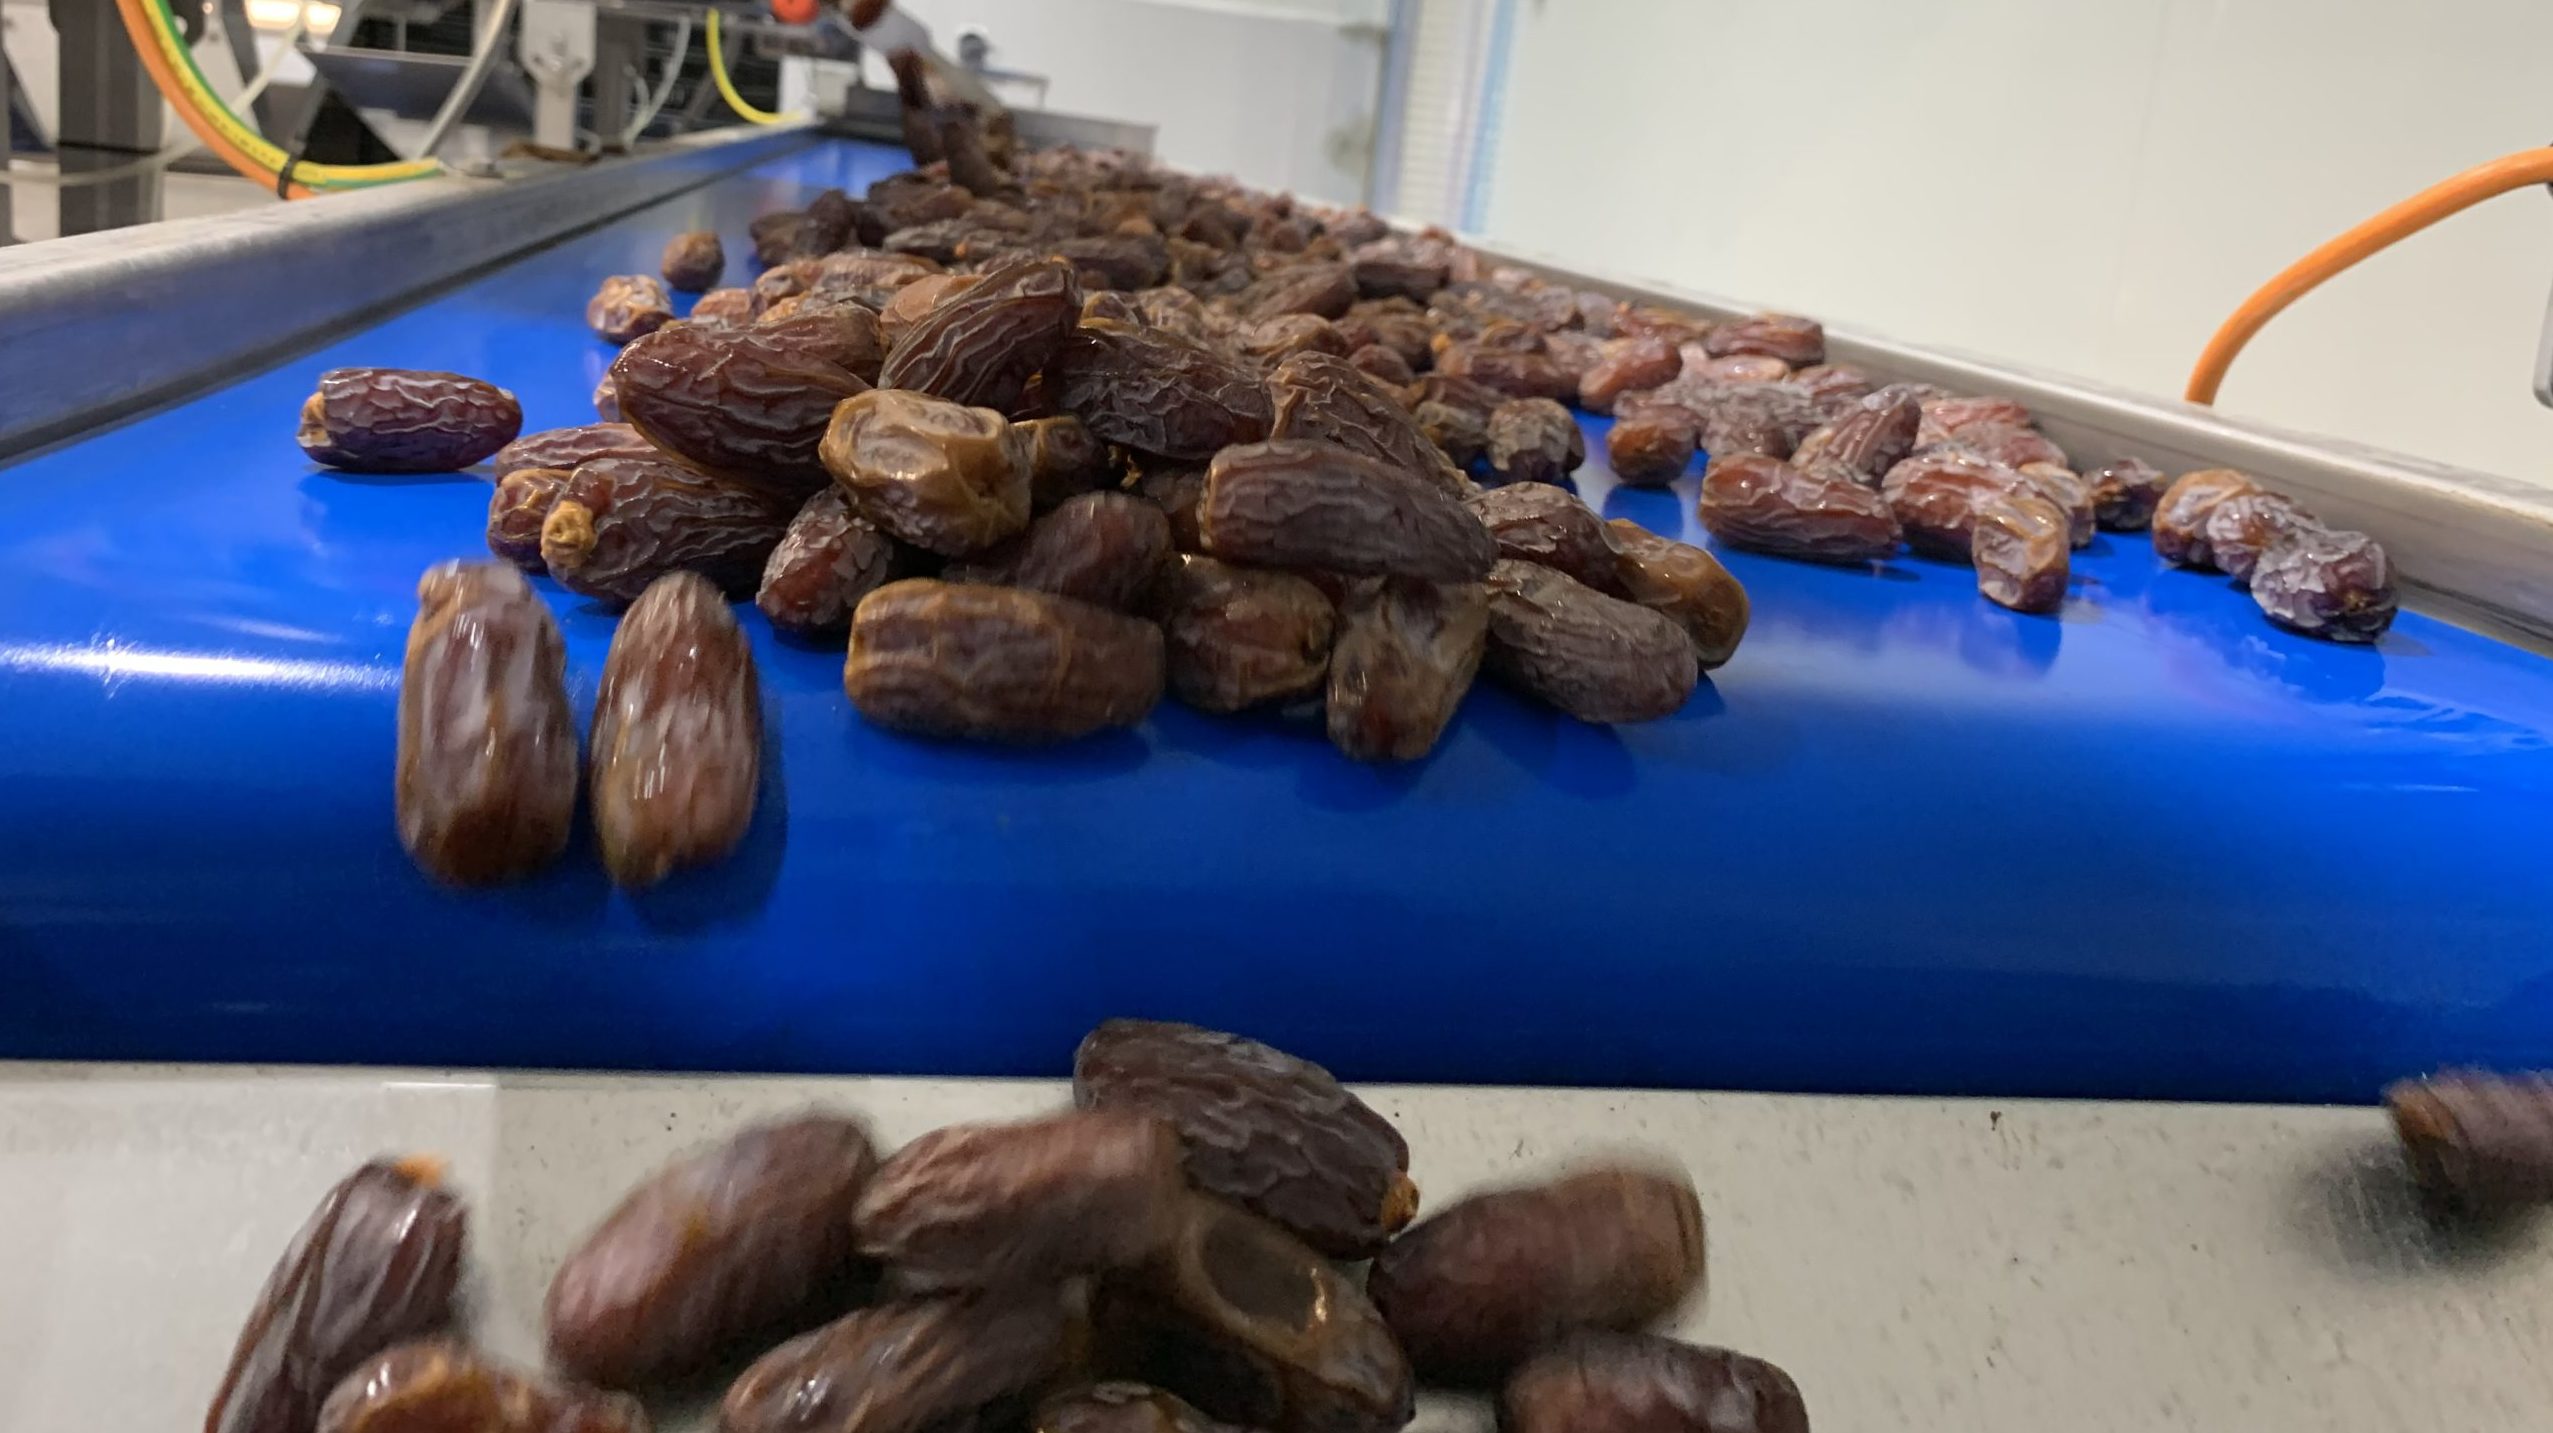 Have a Date! Growing Business Boosts Desperate Palestinian Economy (VIDEO REPORT)